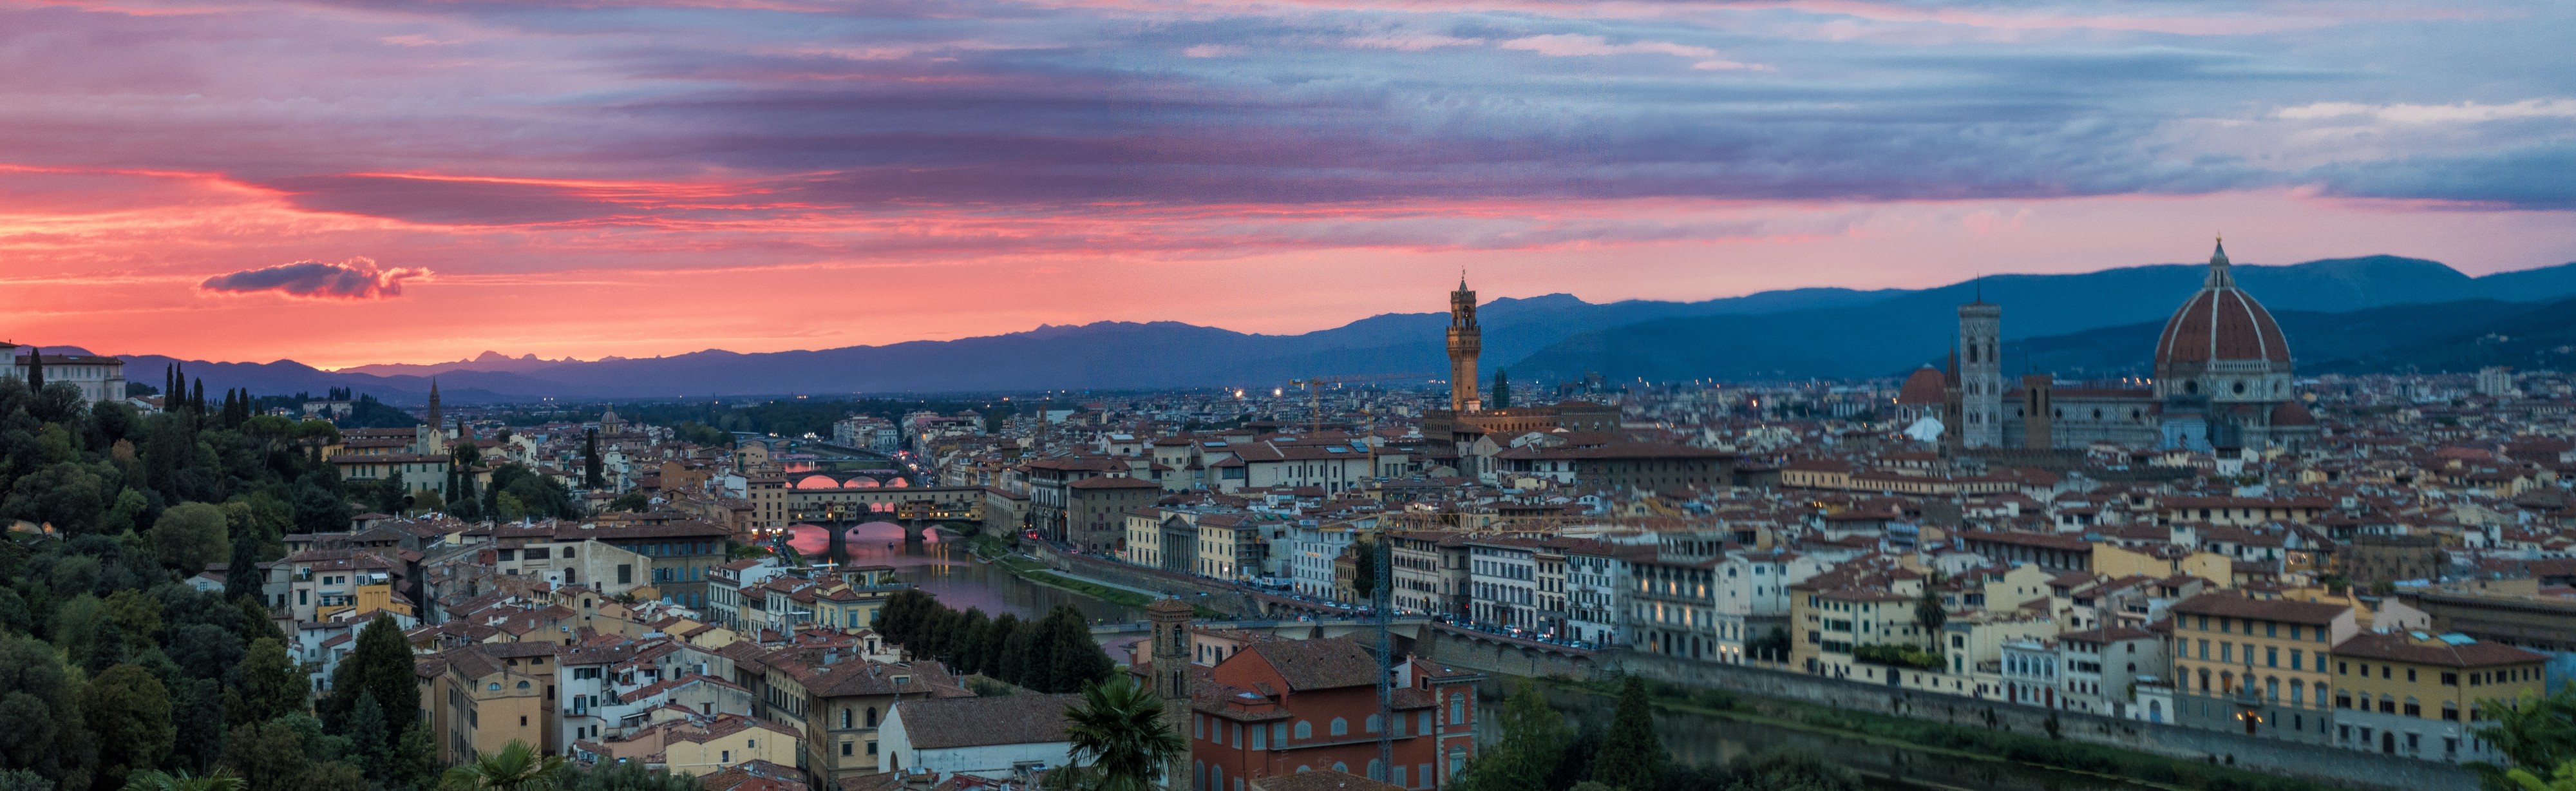 Sunset at Piazzale Michelangelo, Florence, Italy